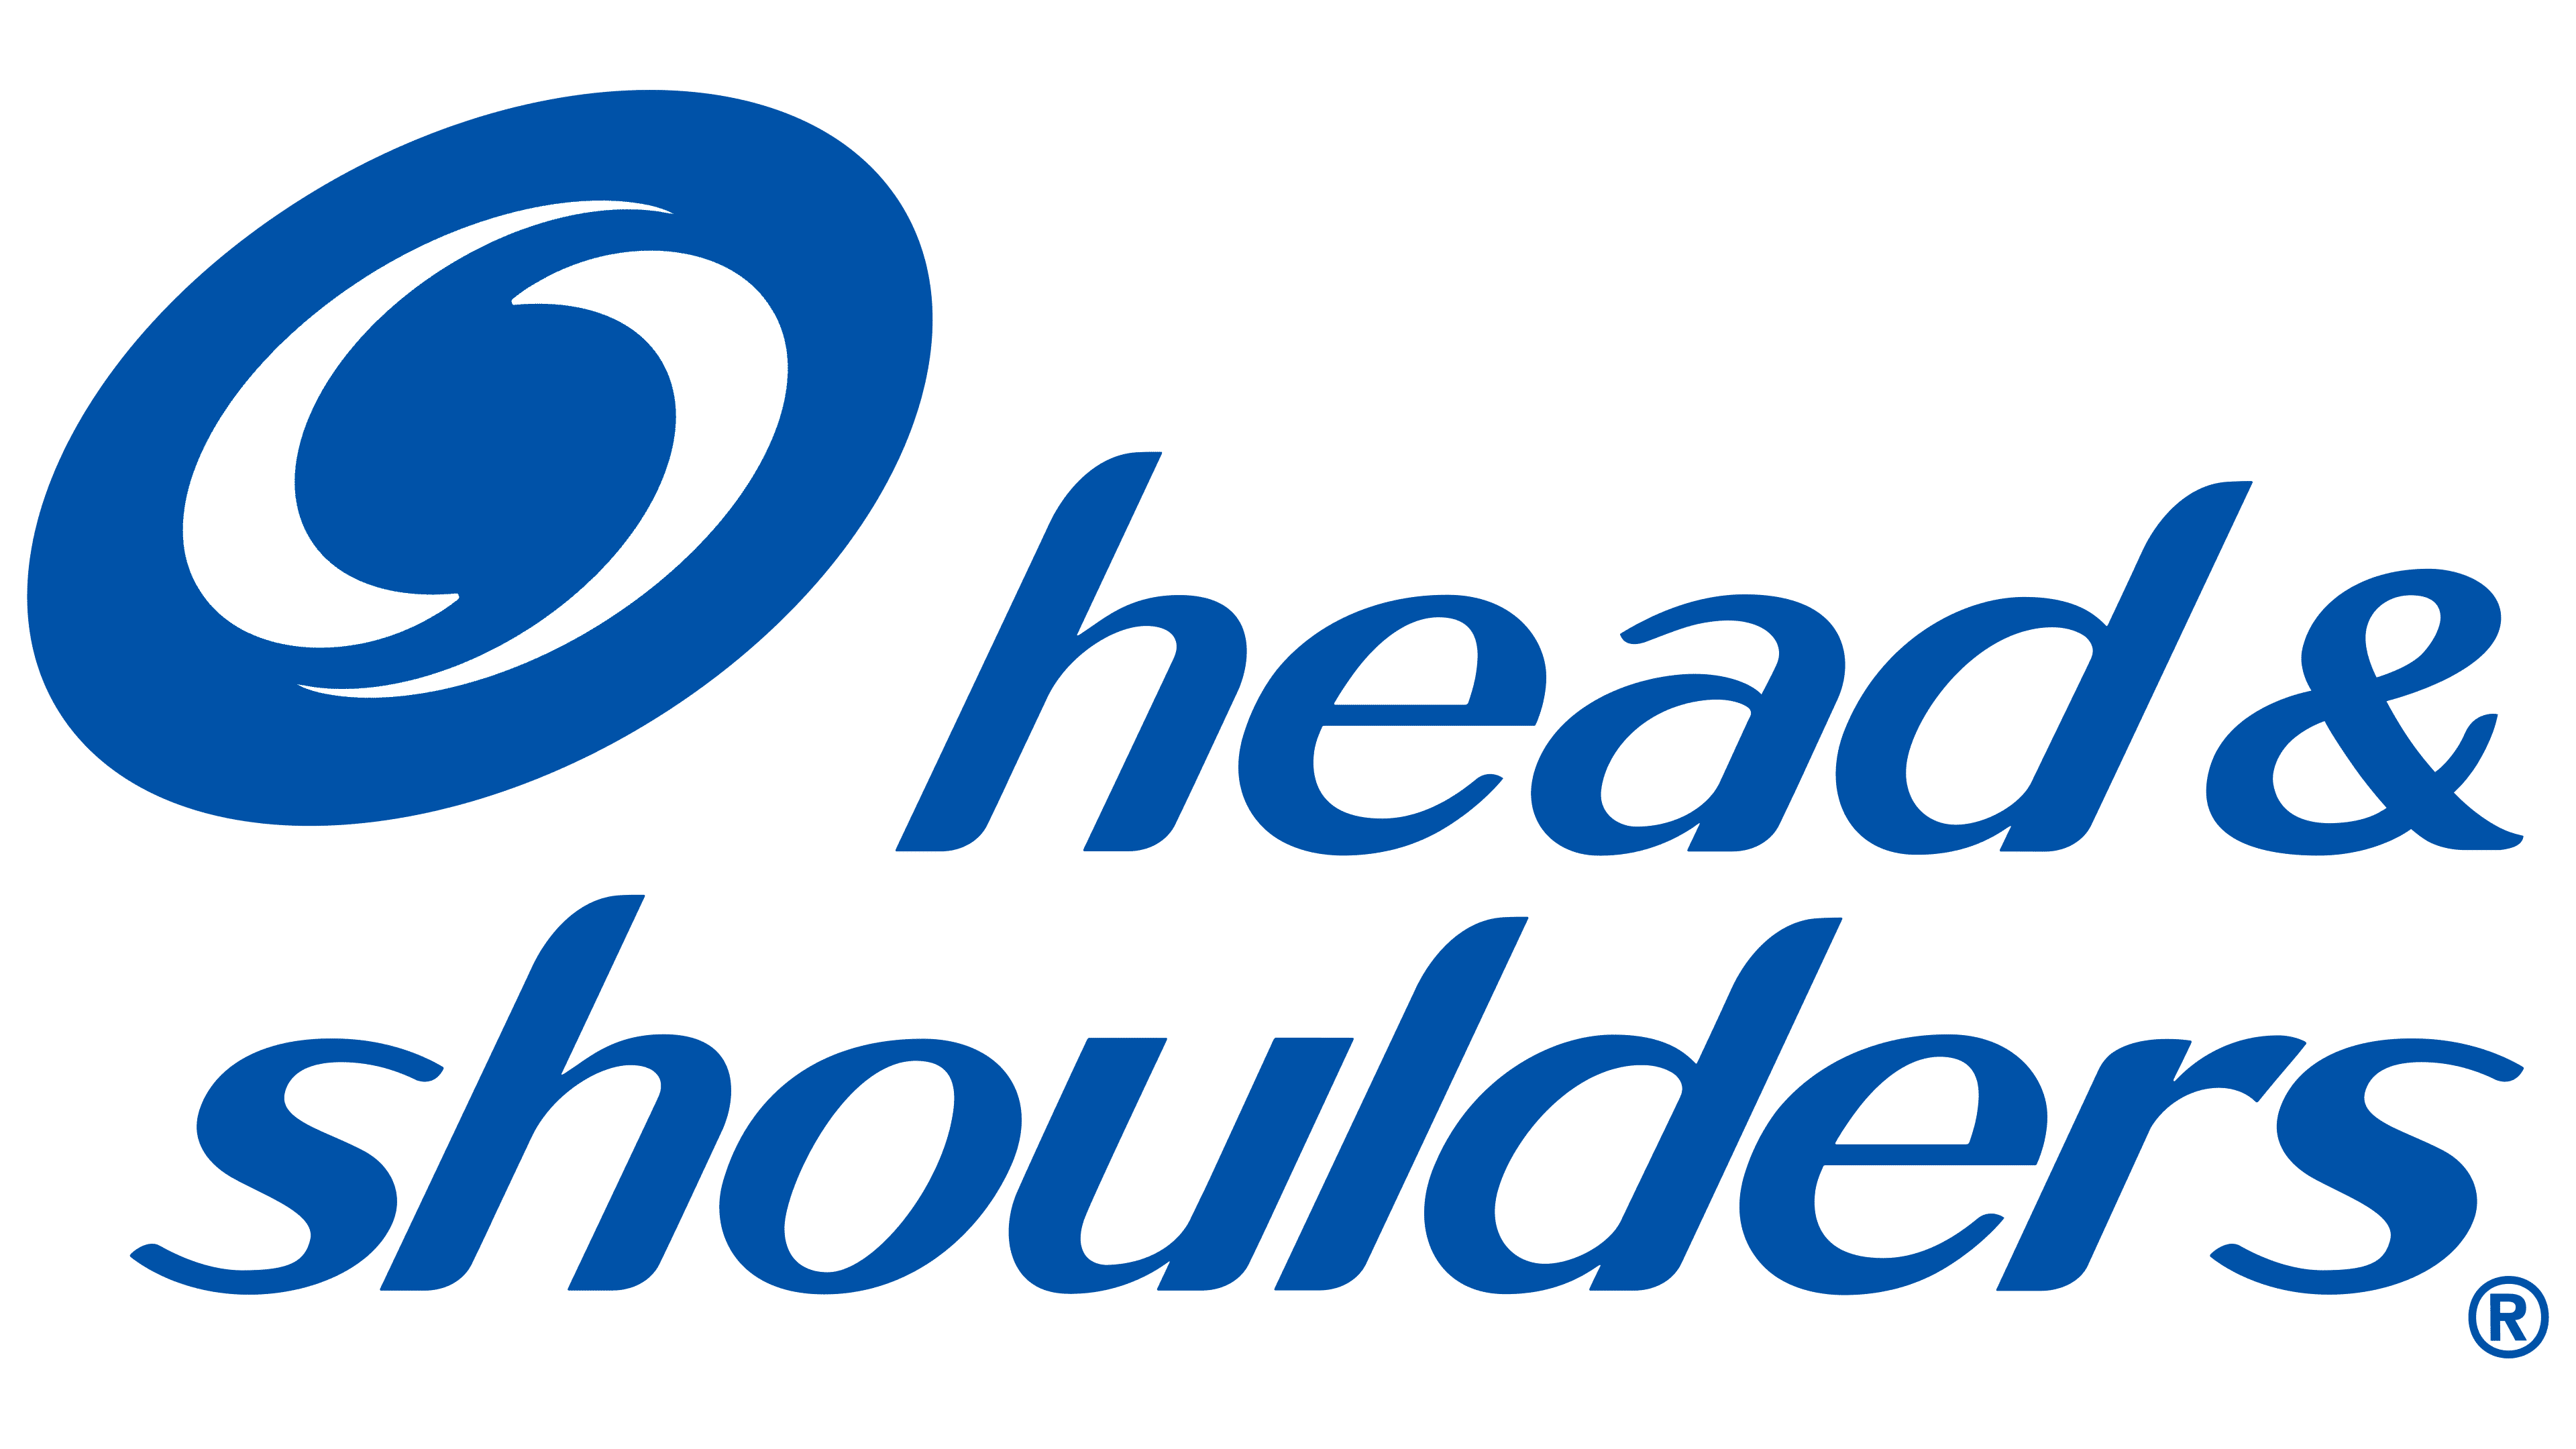 head and shoulders